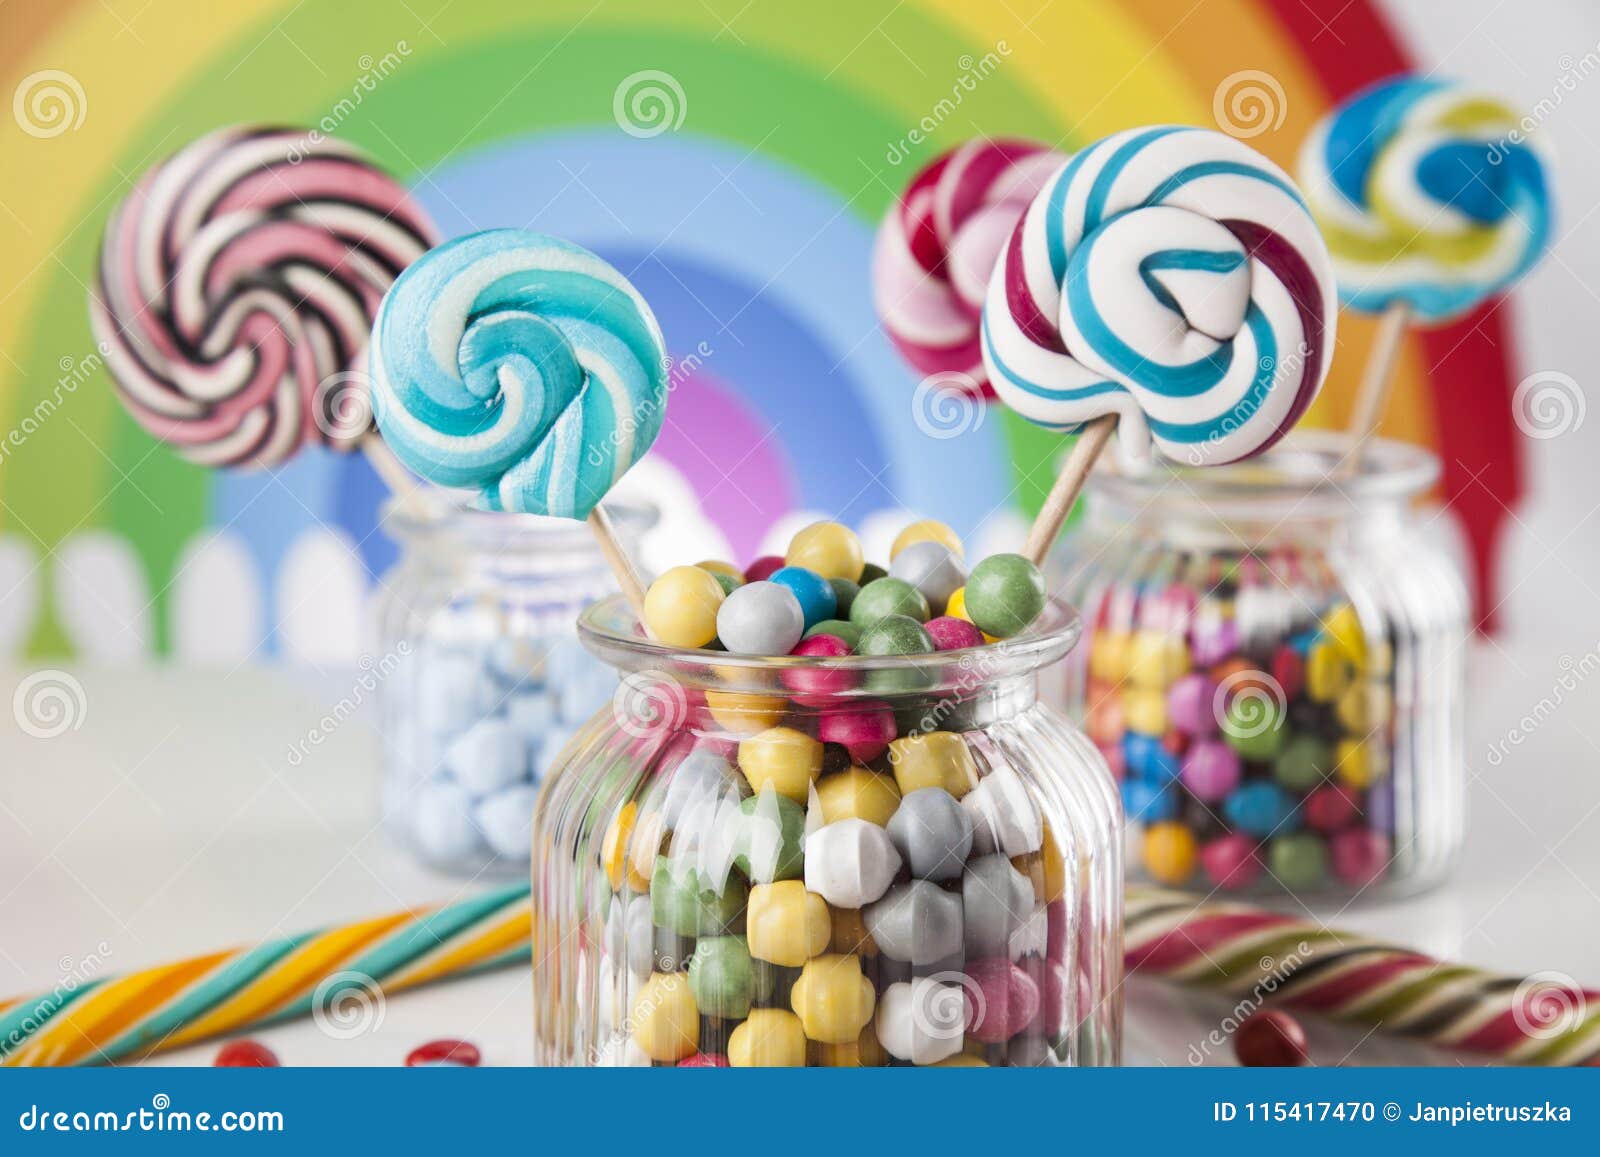 Colorful Candies in Jars on Table on Gum Balls Stock Photo - Image of ...